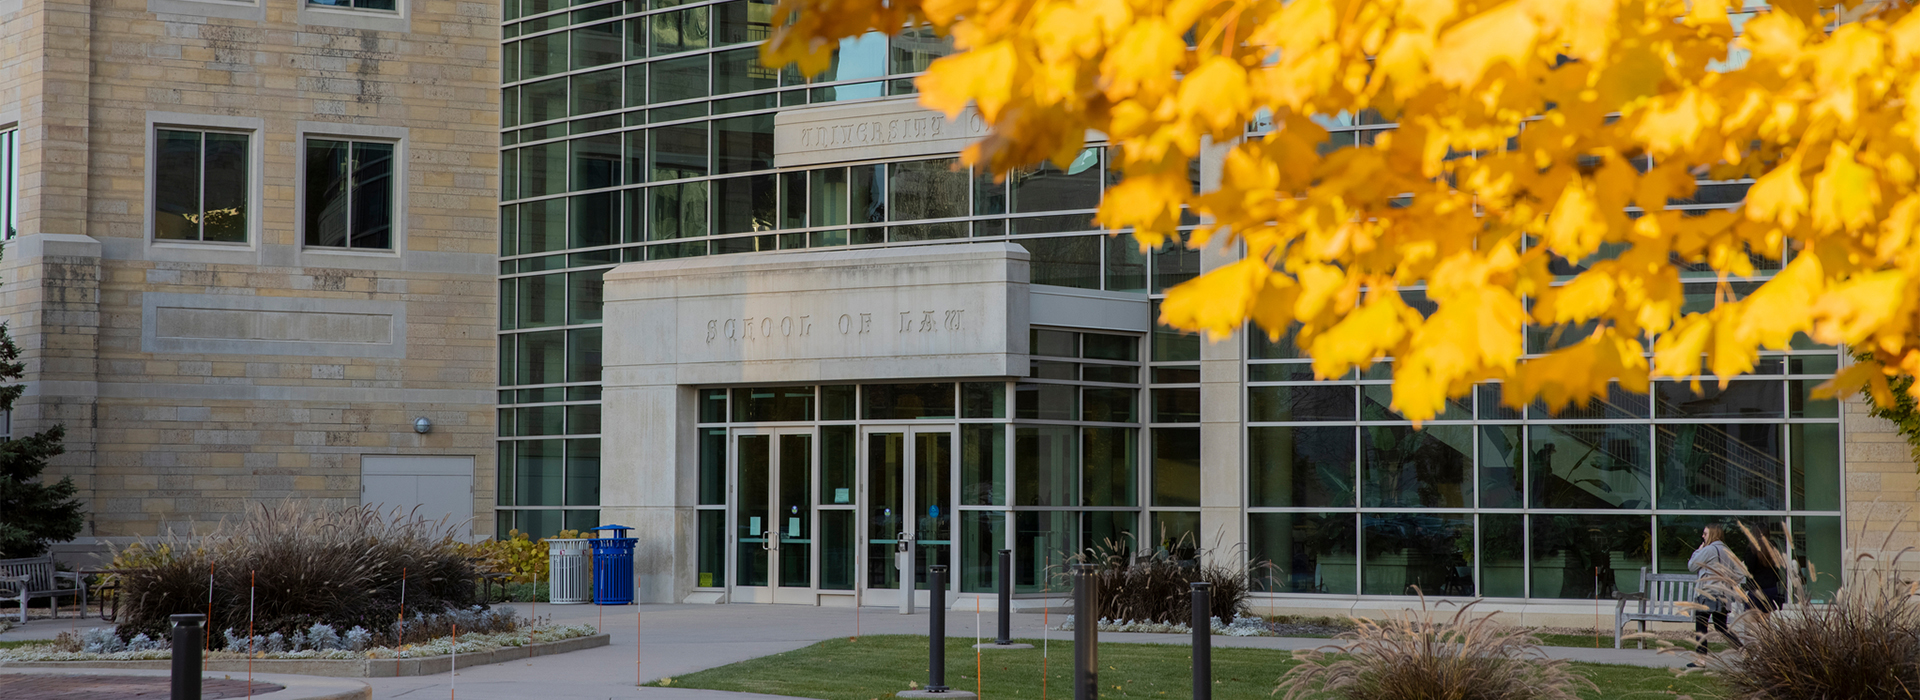 The School of Law main entrance pictured in the fall.